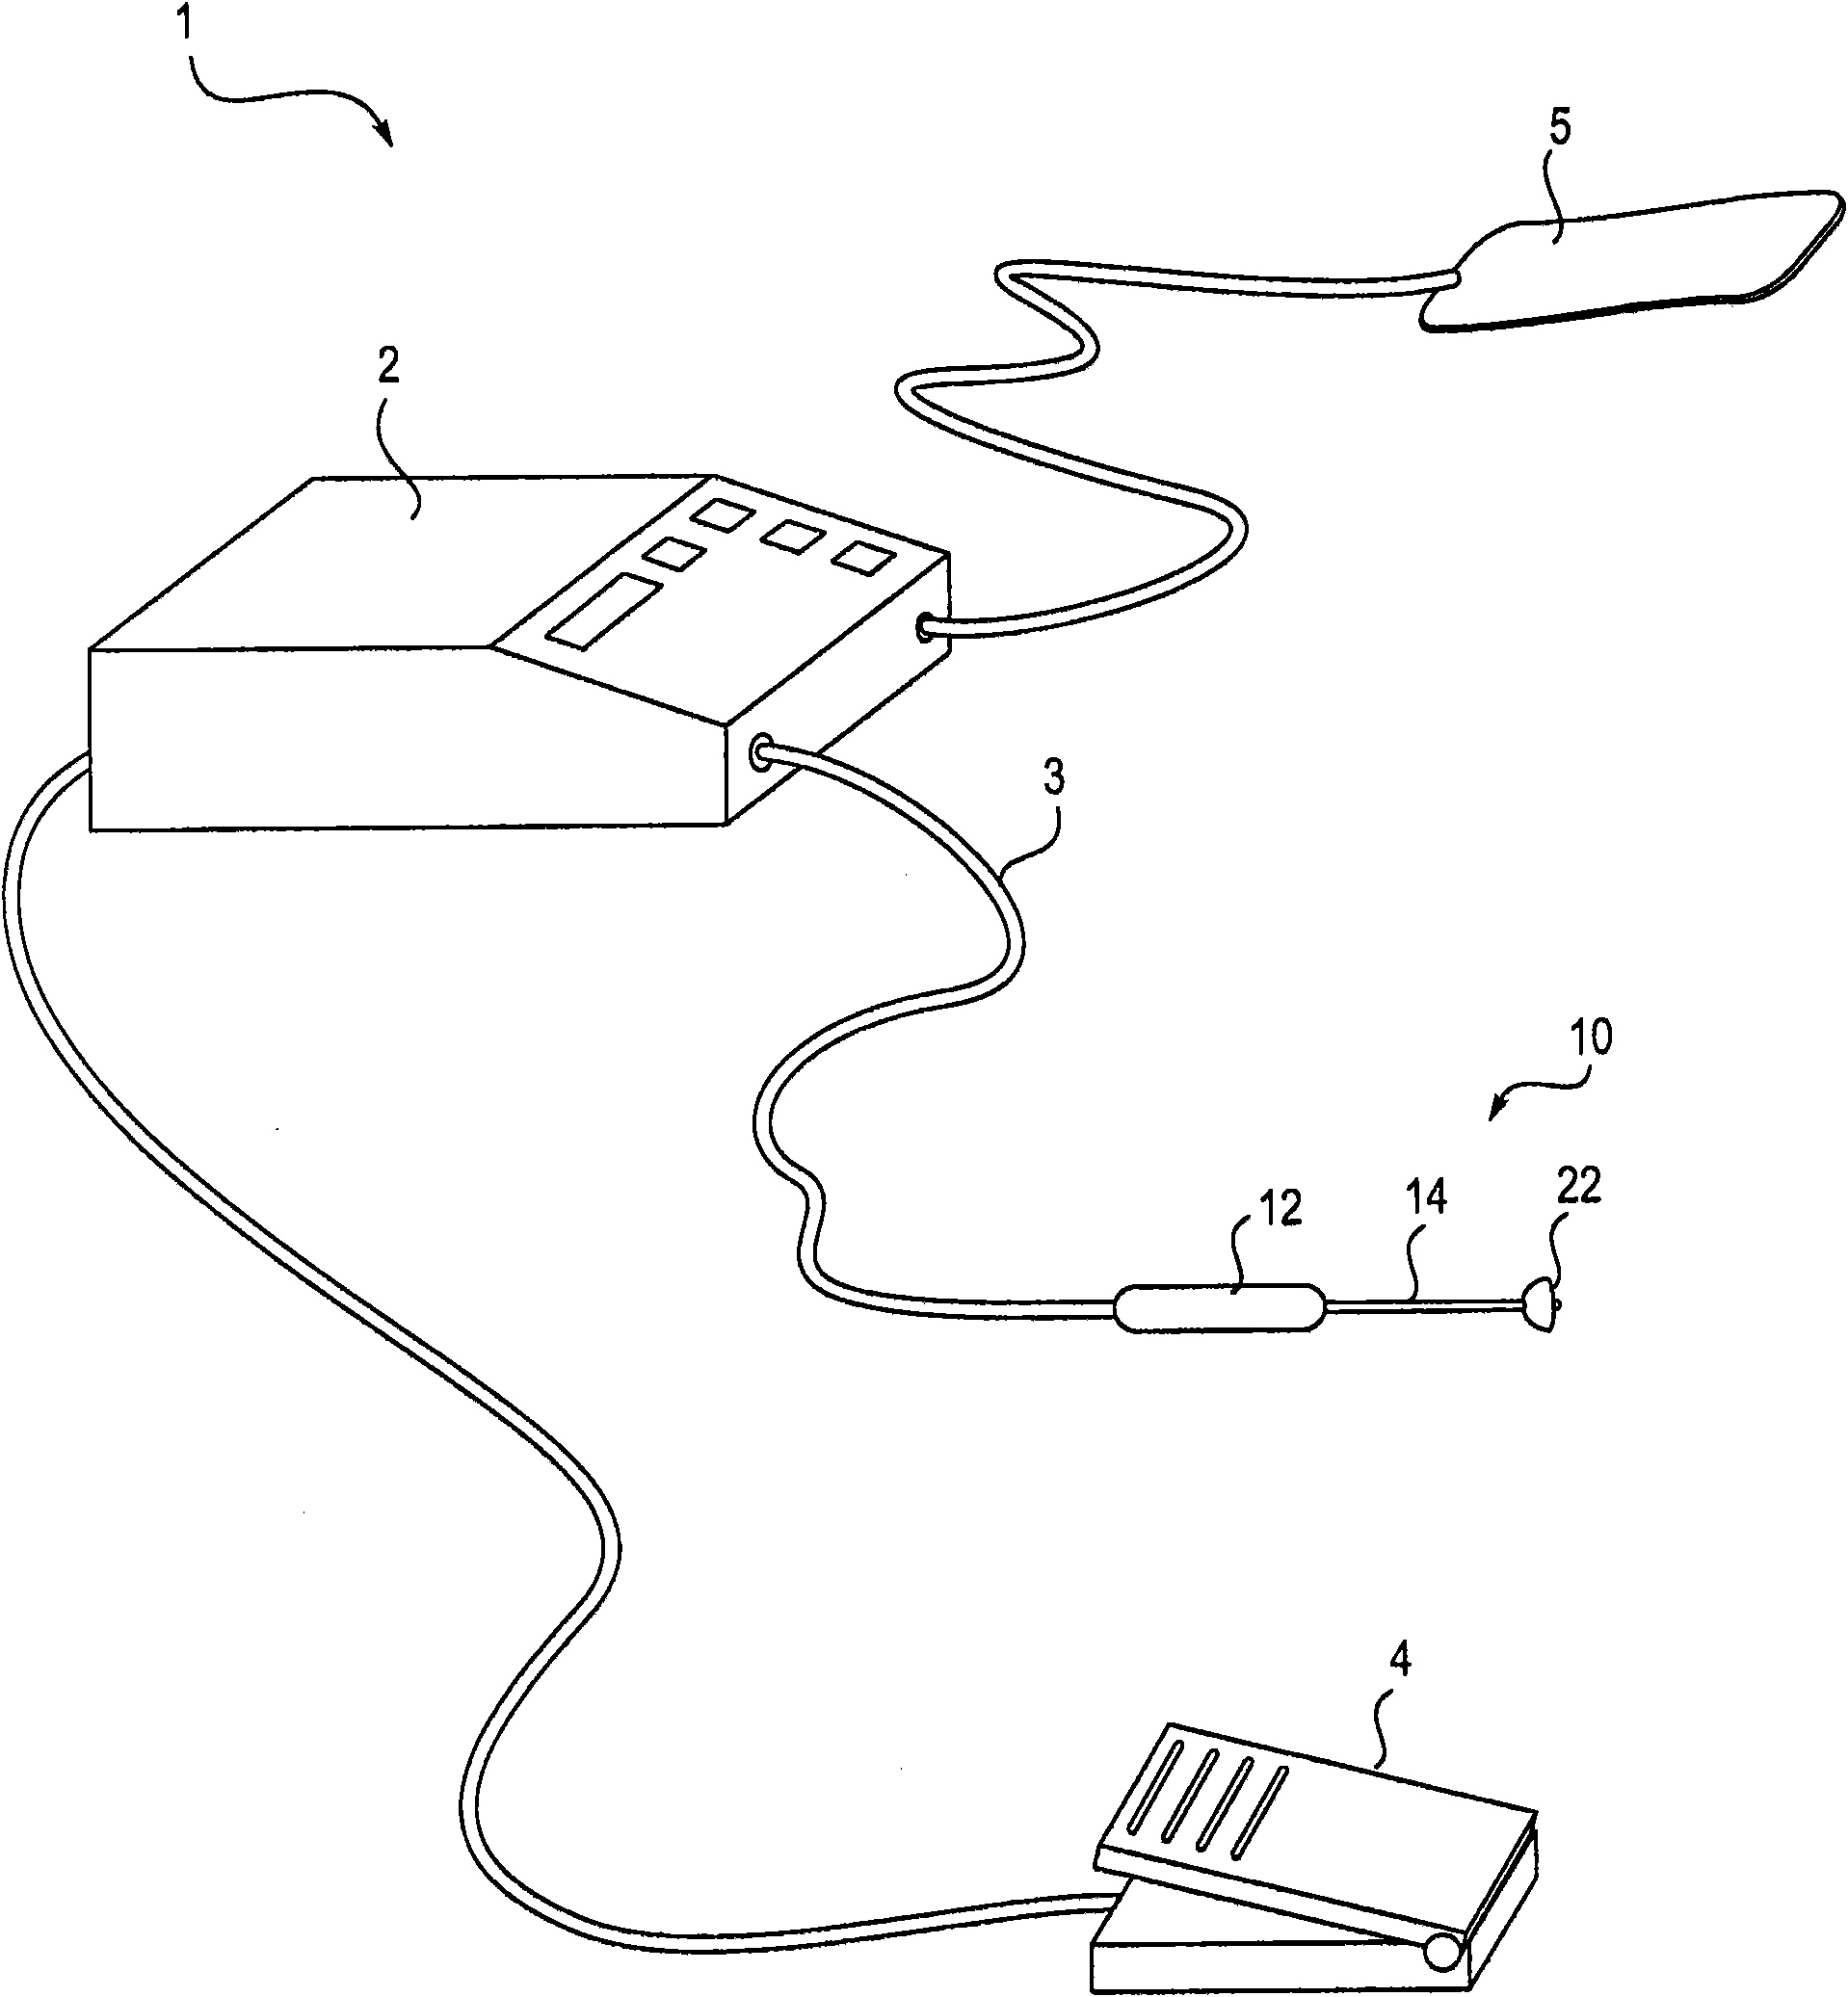 System and method for ablational treatment of uterine cervical neoplasia